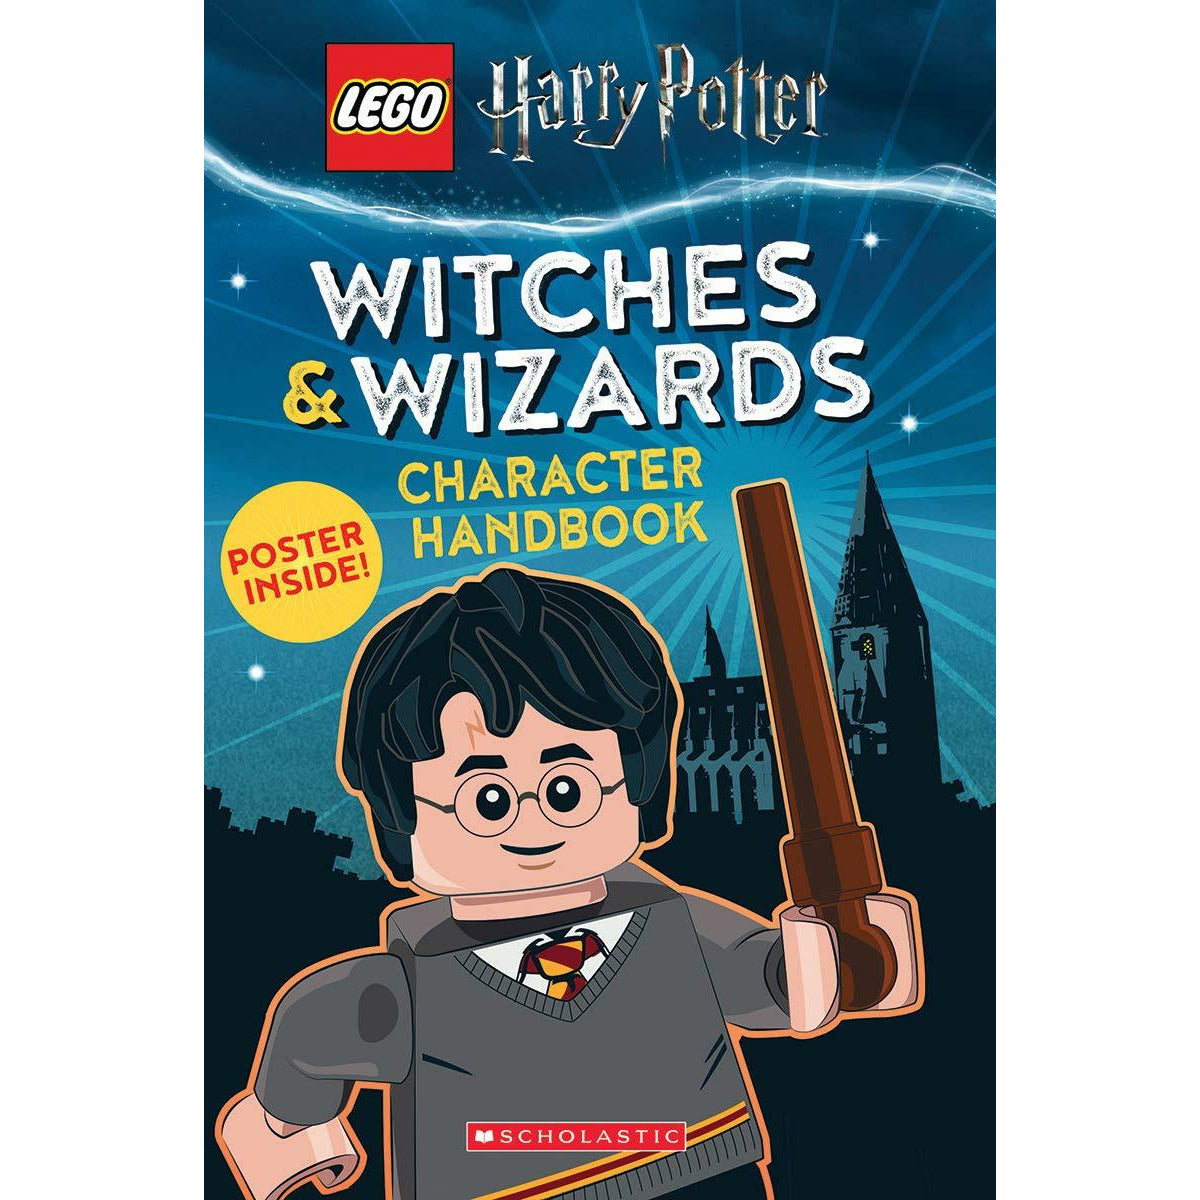 Witches and Wizards Character Handbook (LEGO Harry Potter)